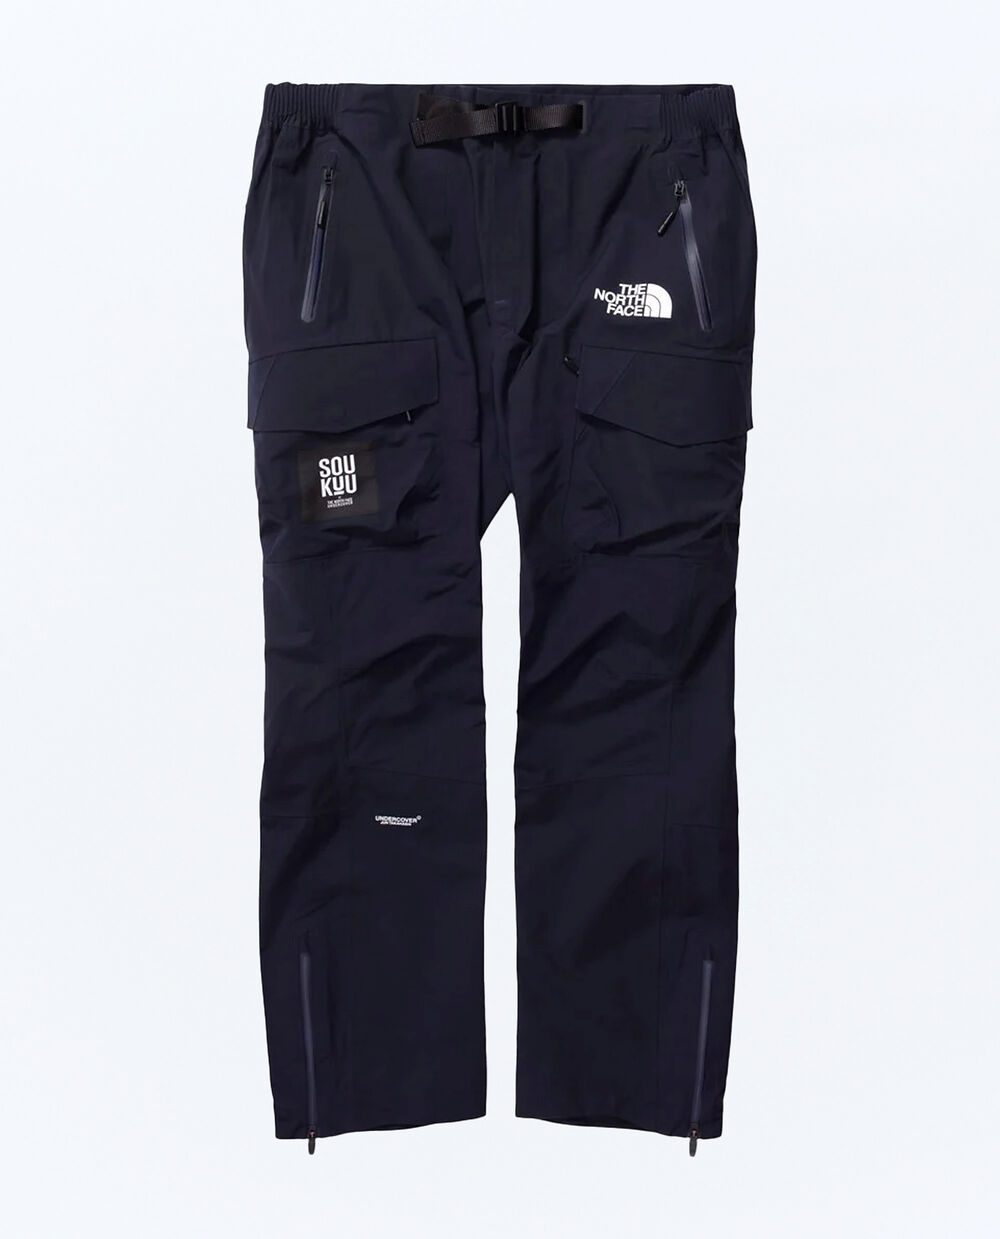 THE NORTH FACE TNF X UNDERCOVER GEODESIC SHELL PANT